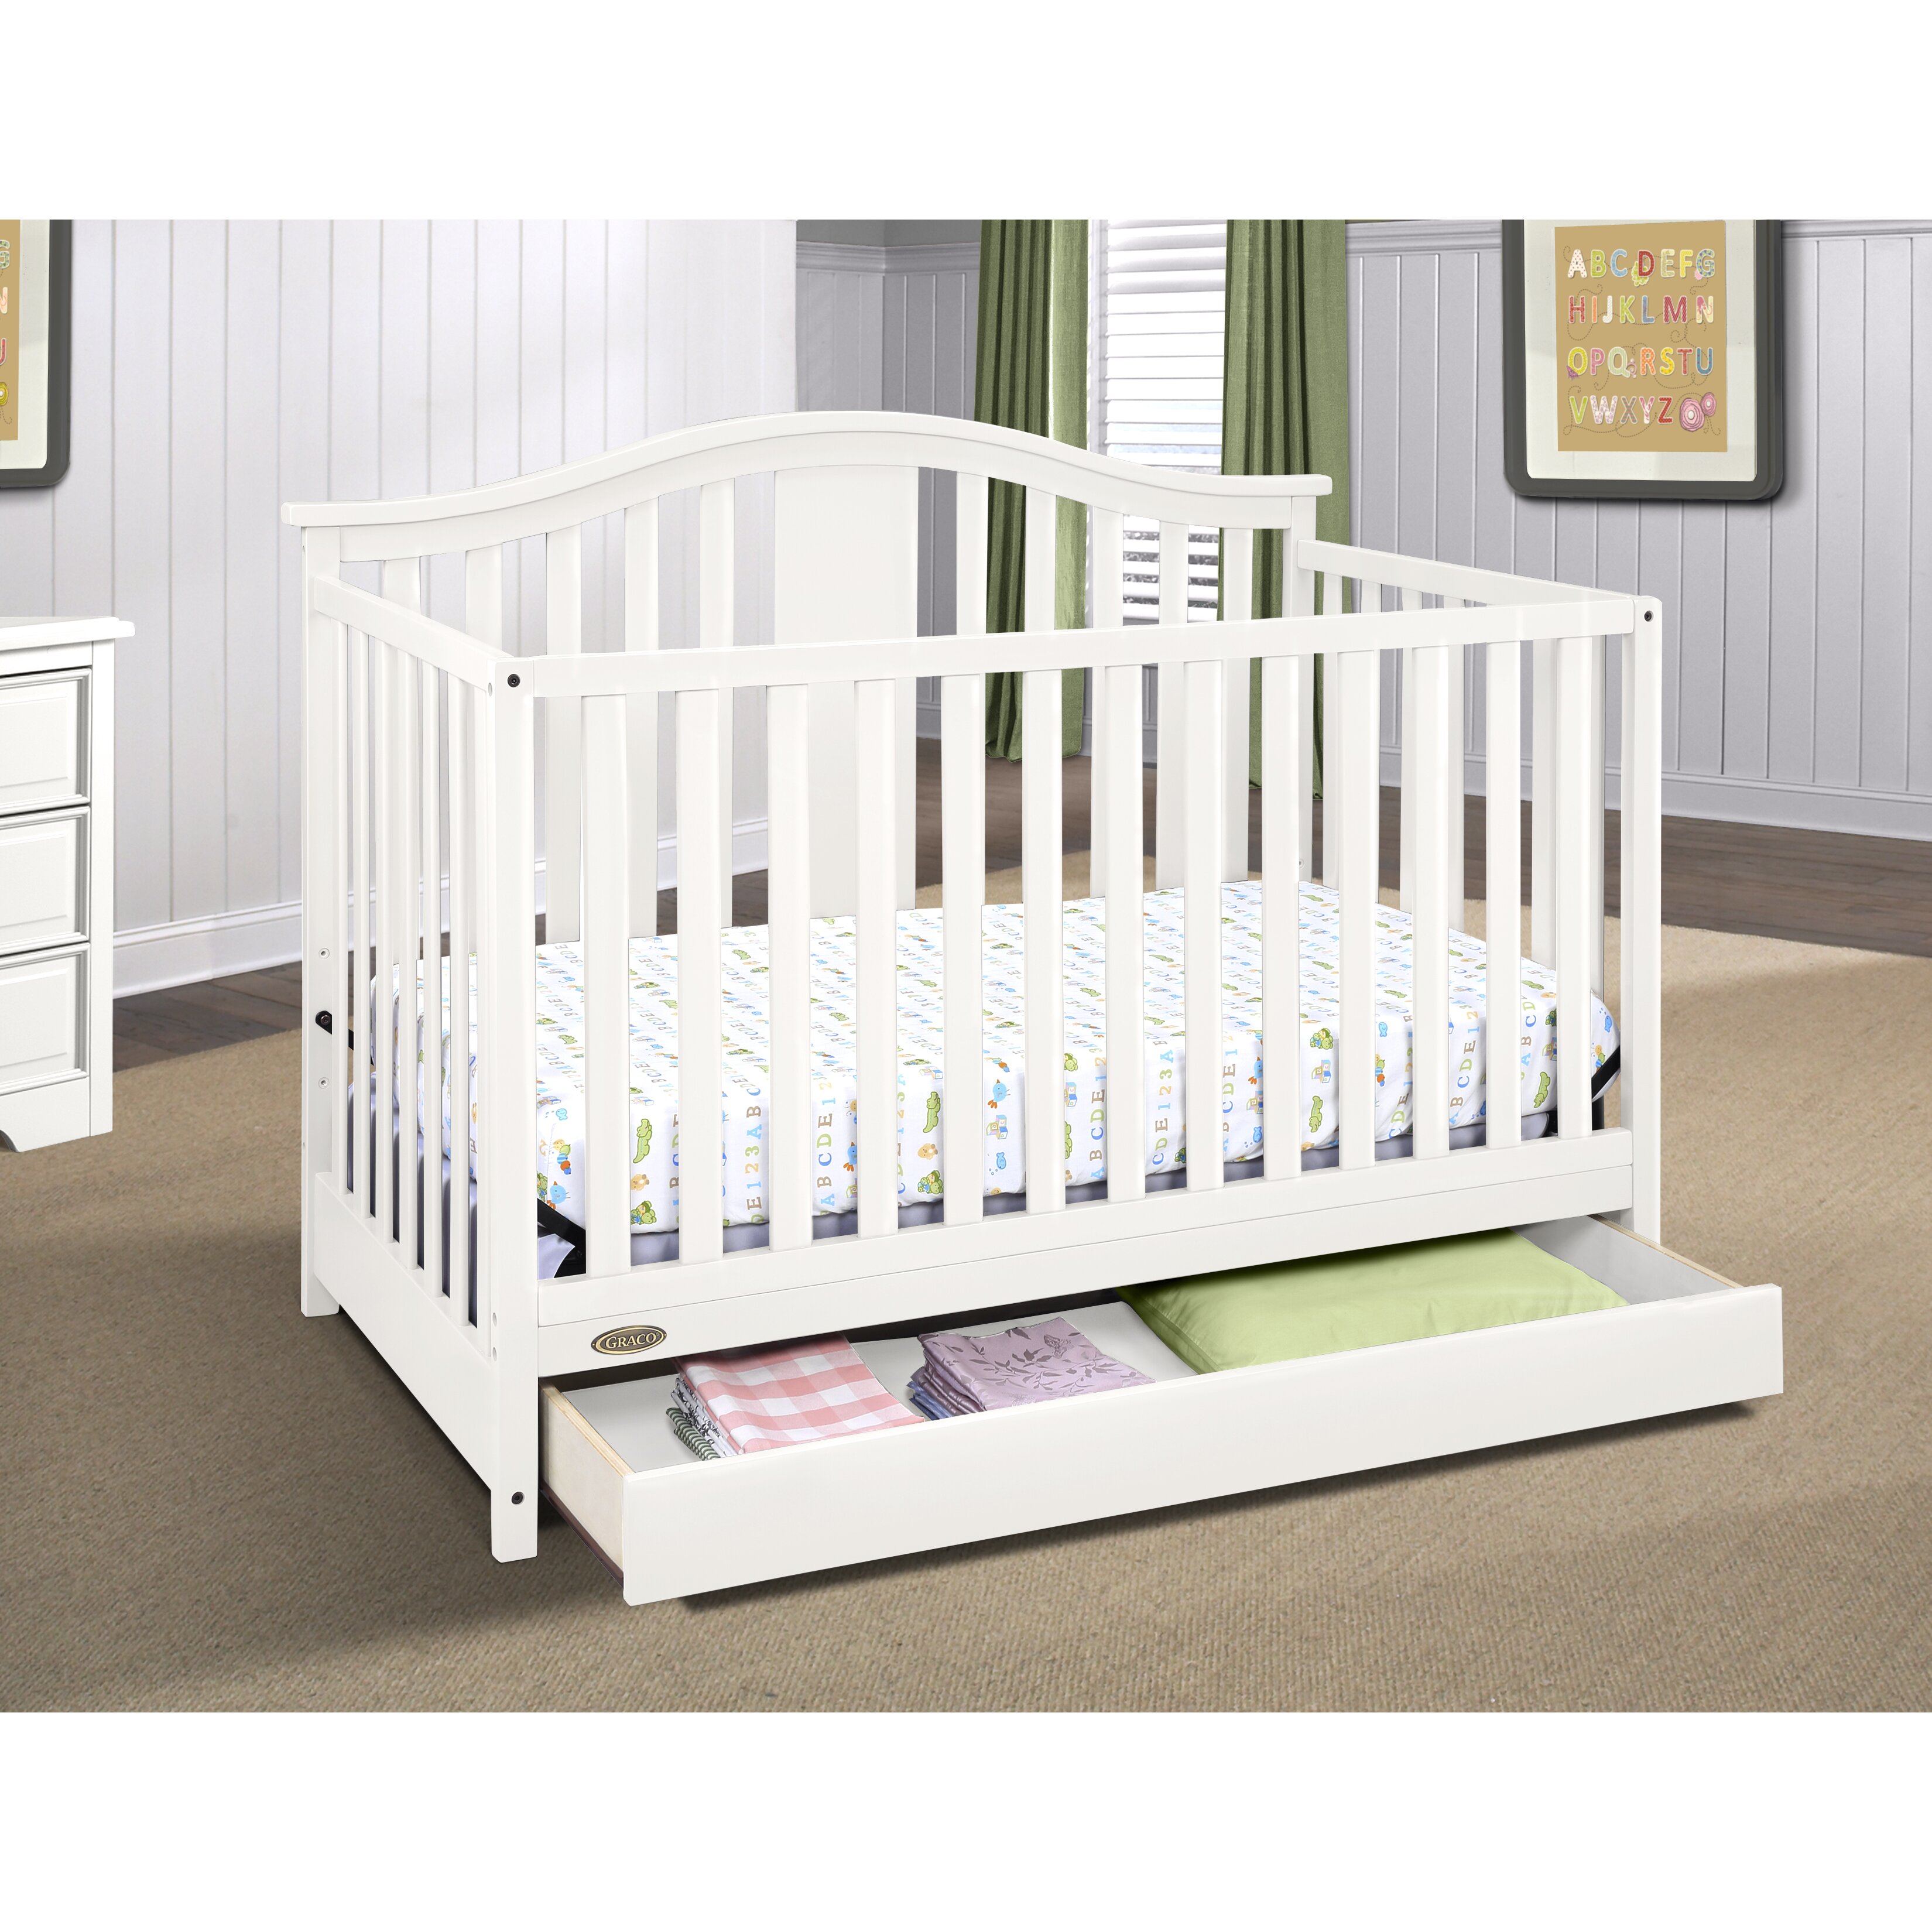 Graco Solano 4in1 Convertible Crib with Drawer Wayfair